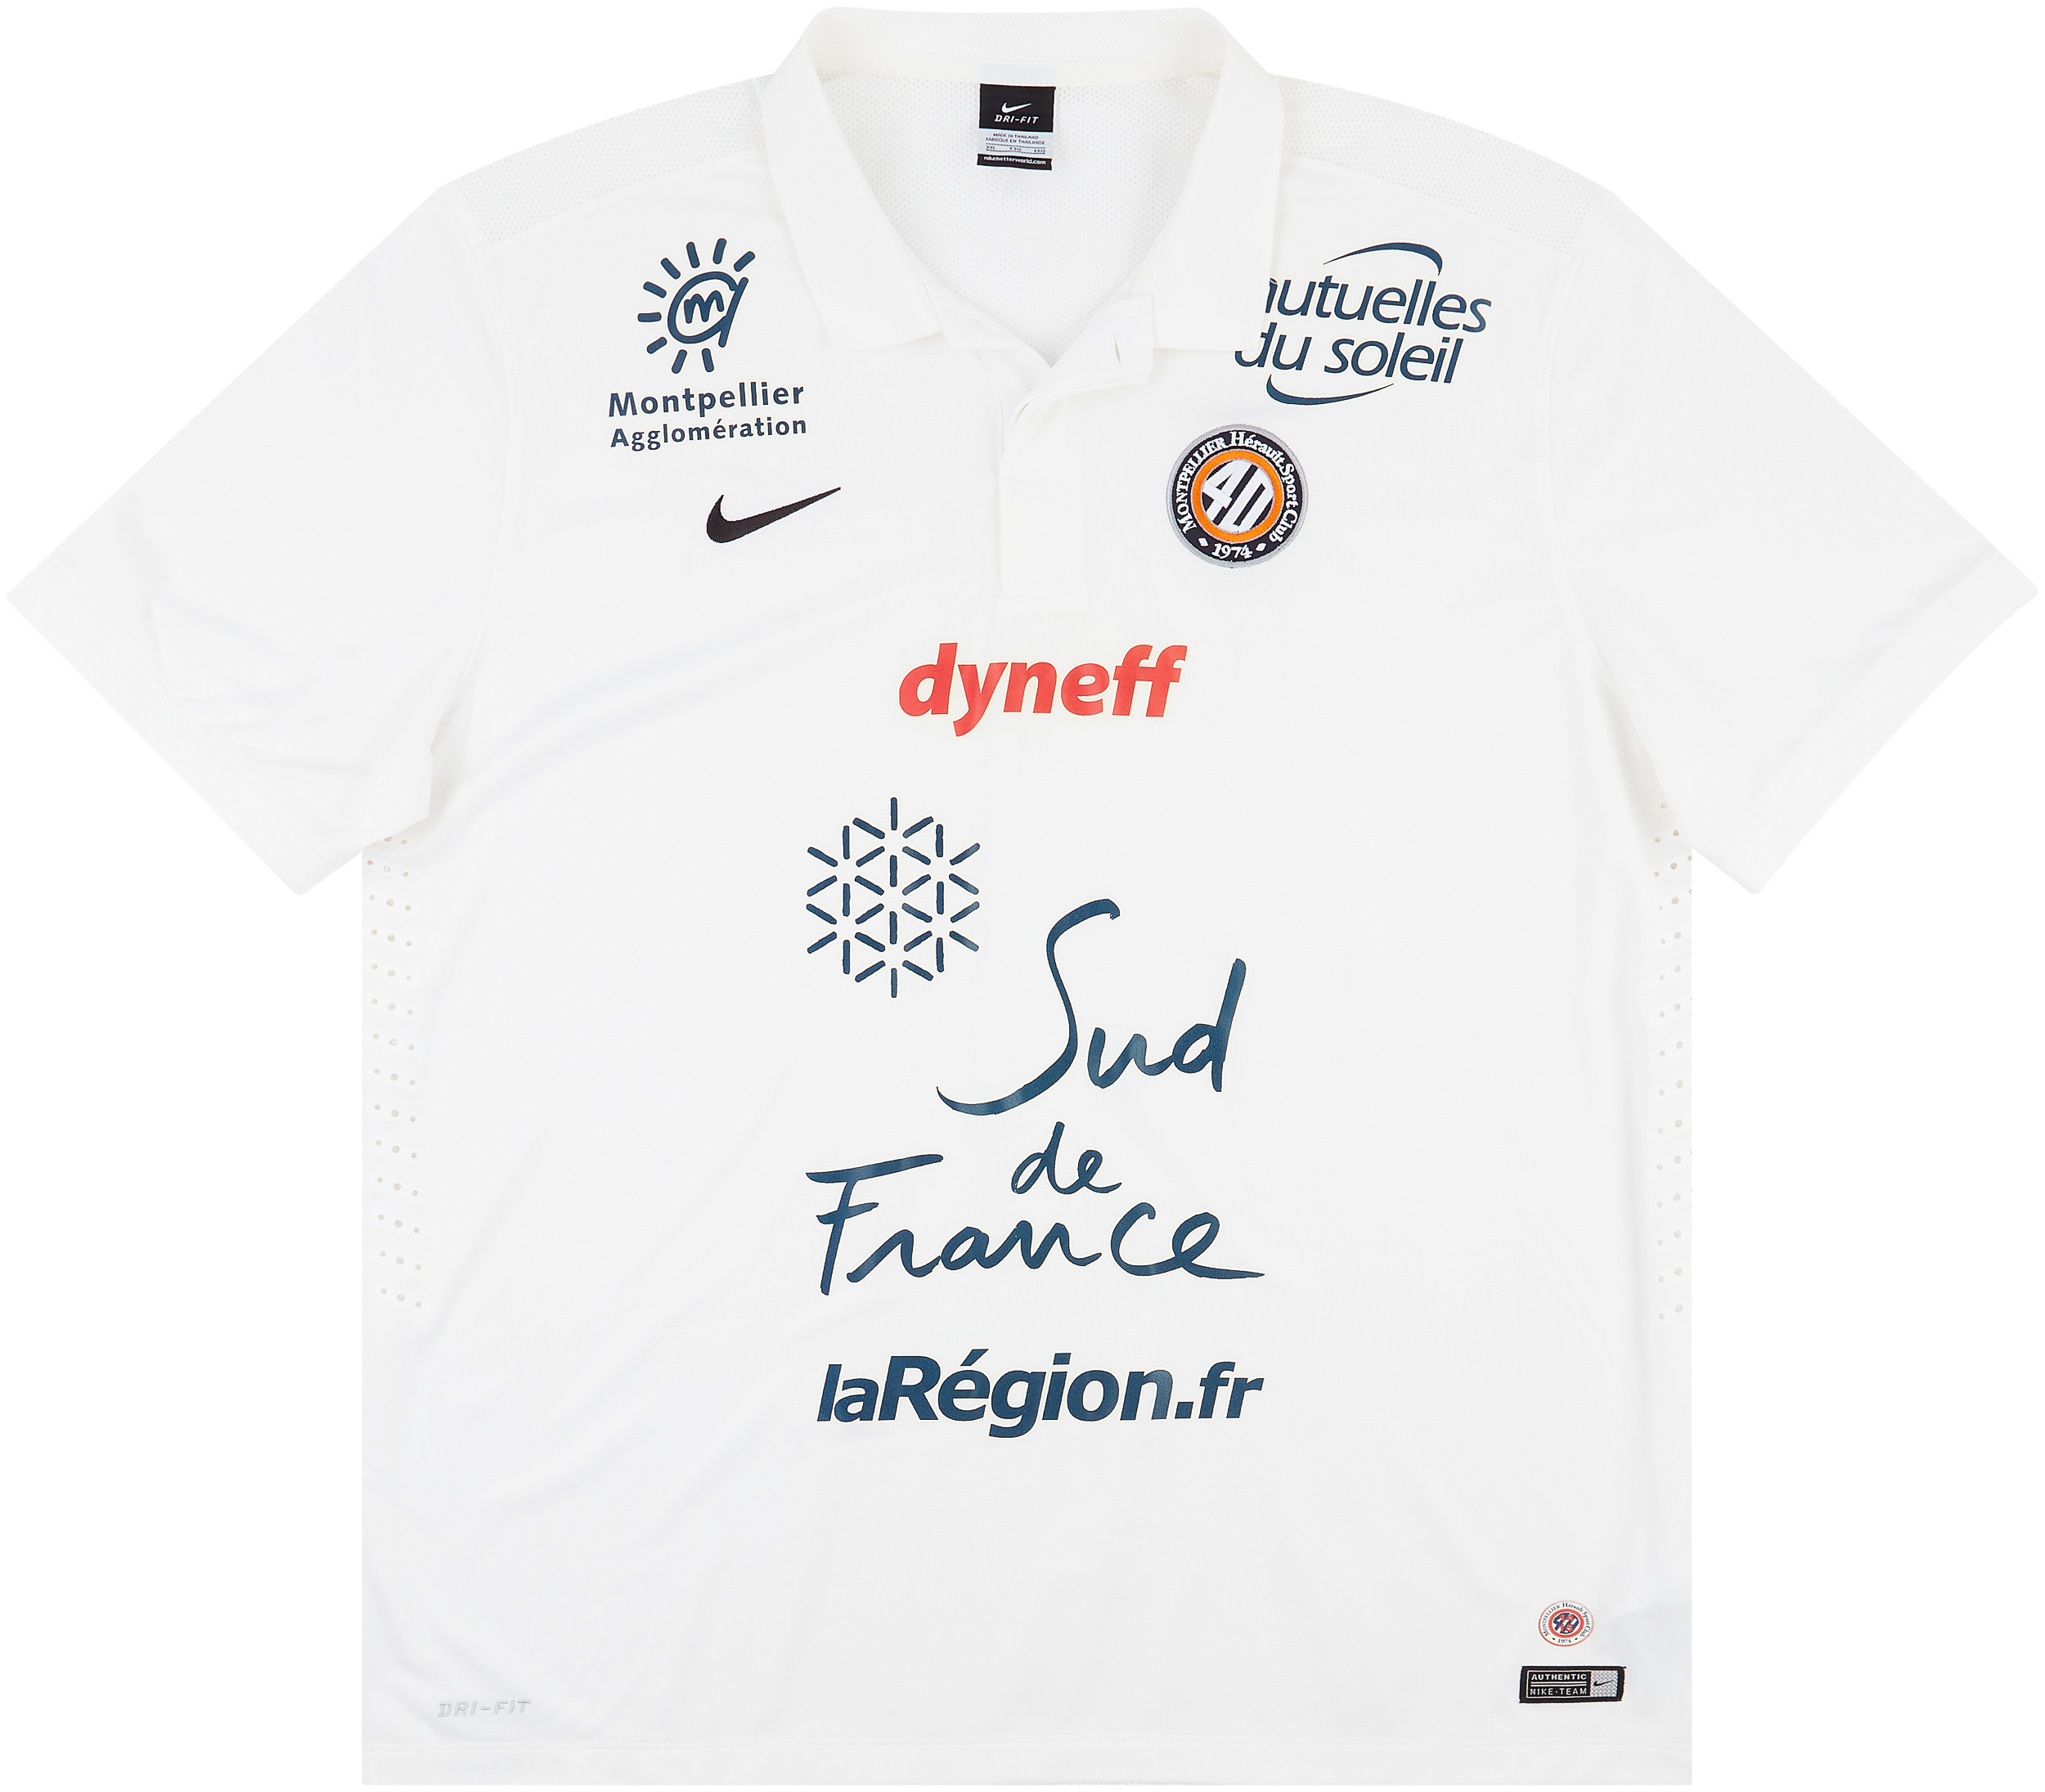 2014-15 Montpellier Player Issue Away Shirt - 10/10 - ()